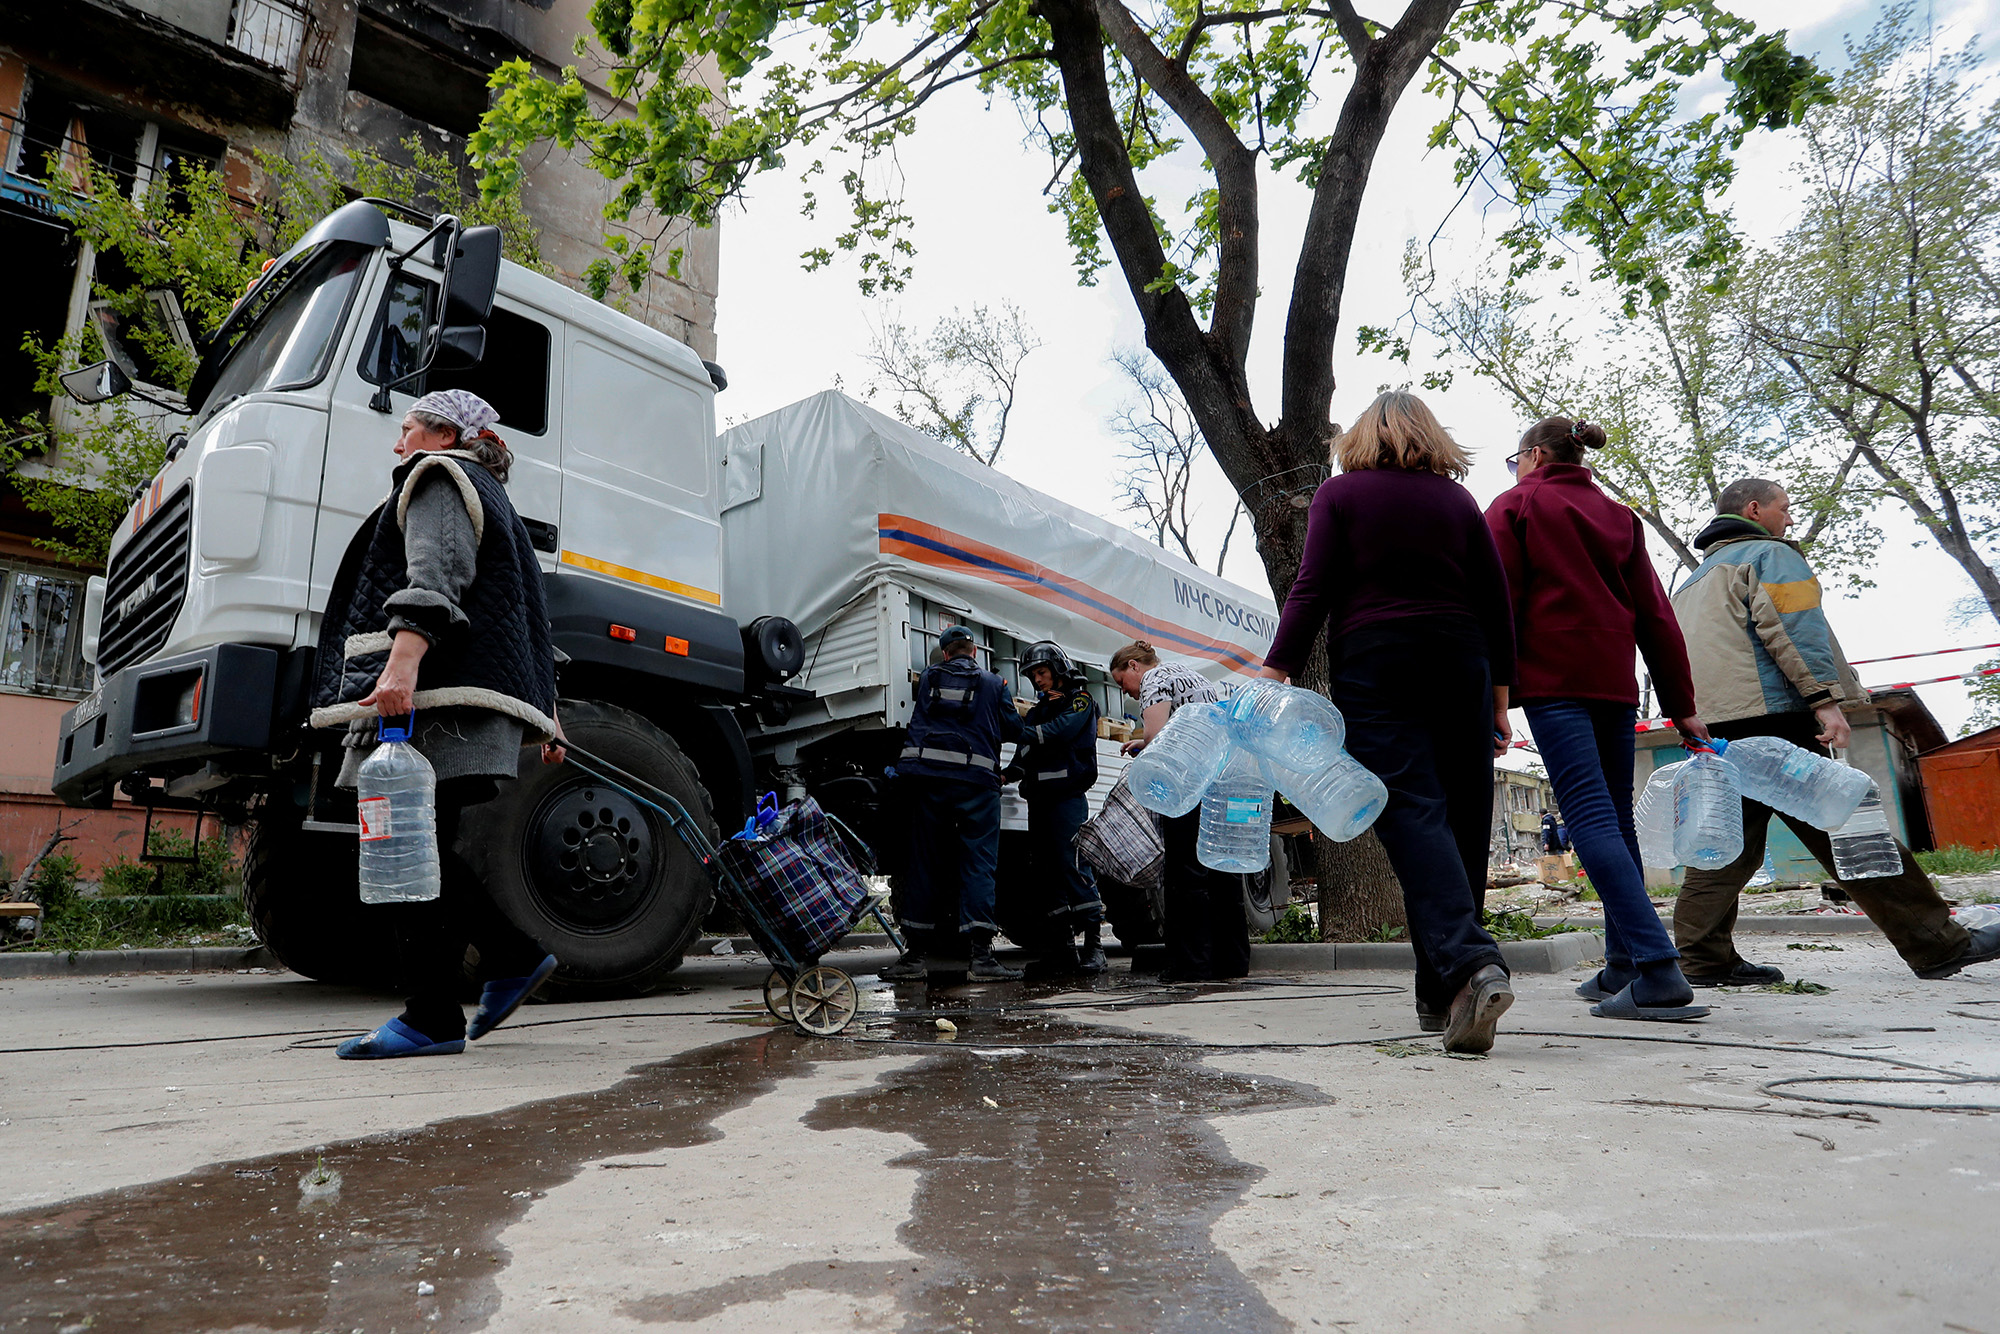 Local residents gather near a tanker to collect drinking water in Mariupol, Ukraine, on May 11.